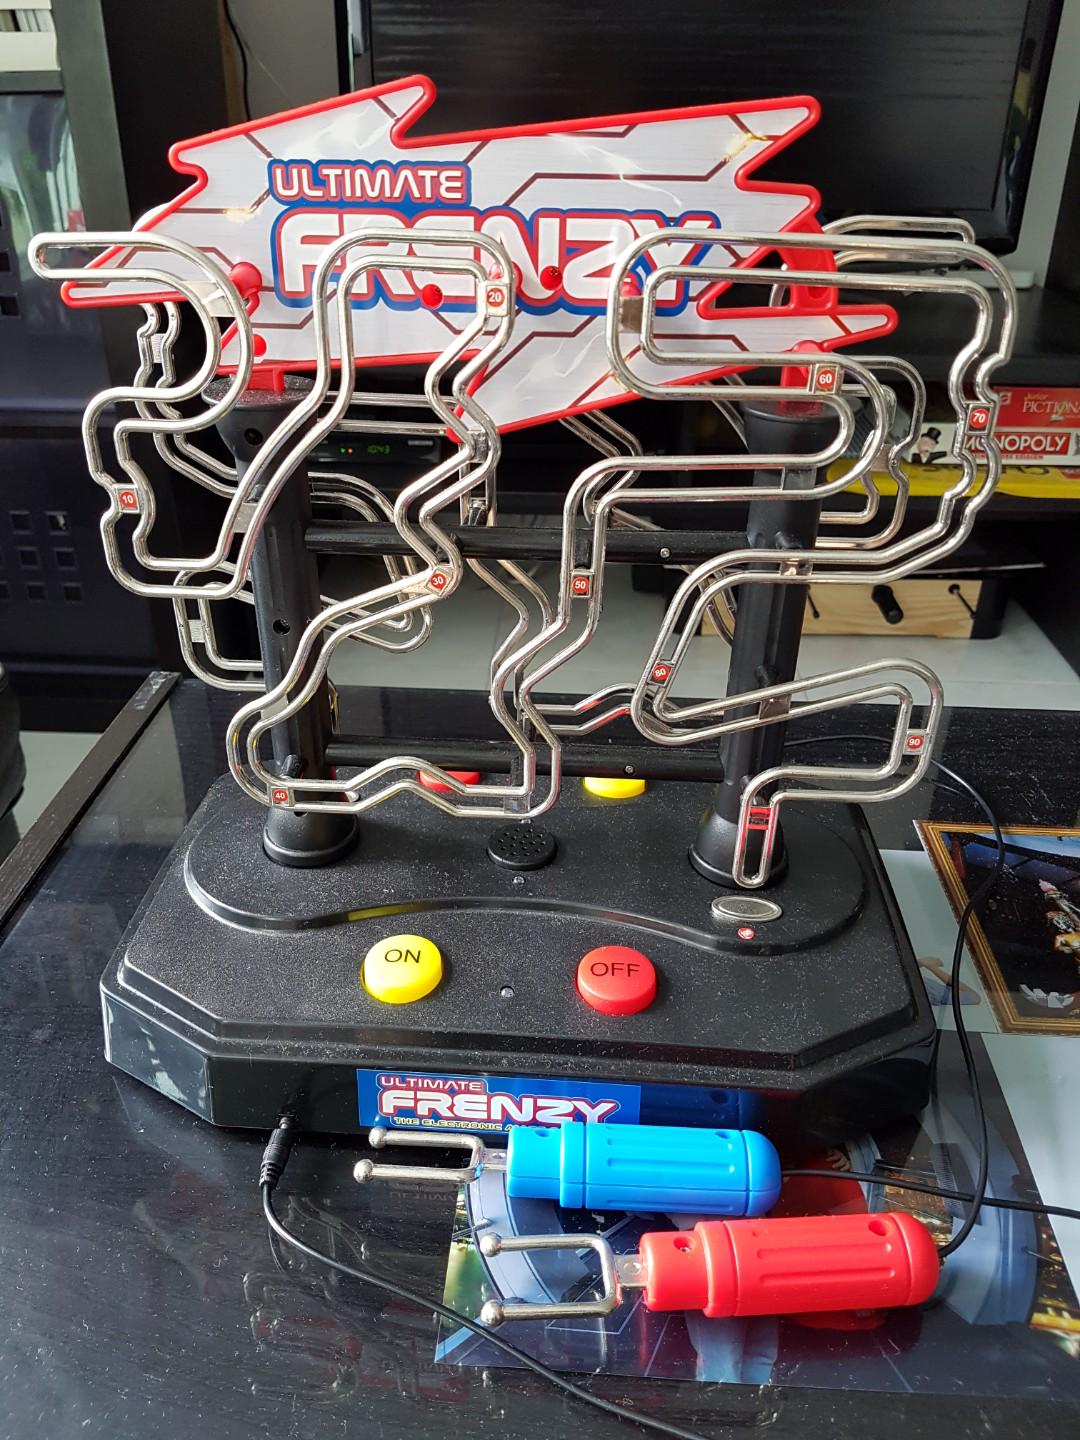 ultimate frenzy electronic maze game